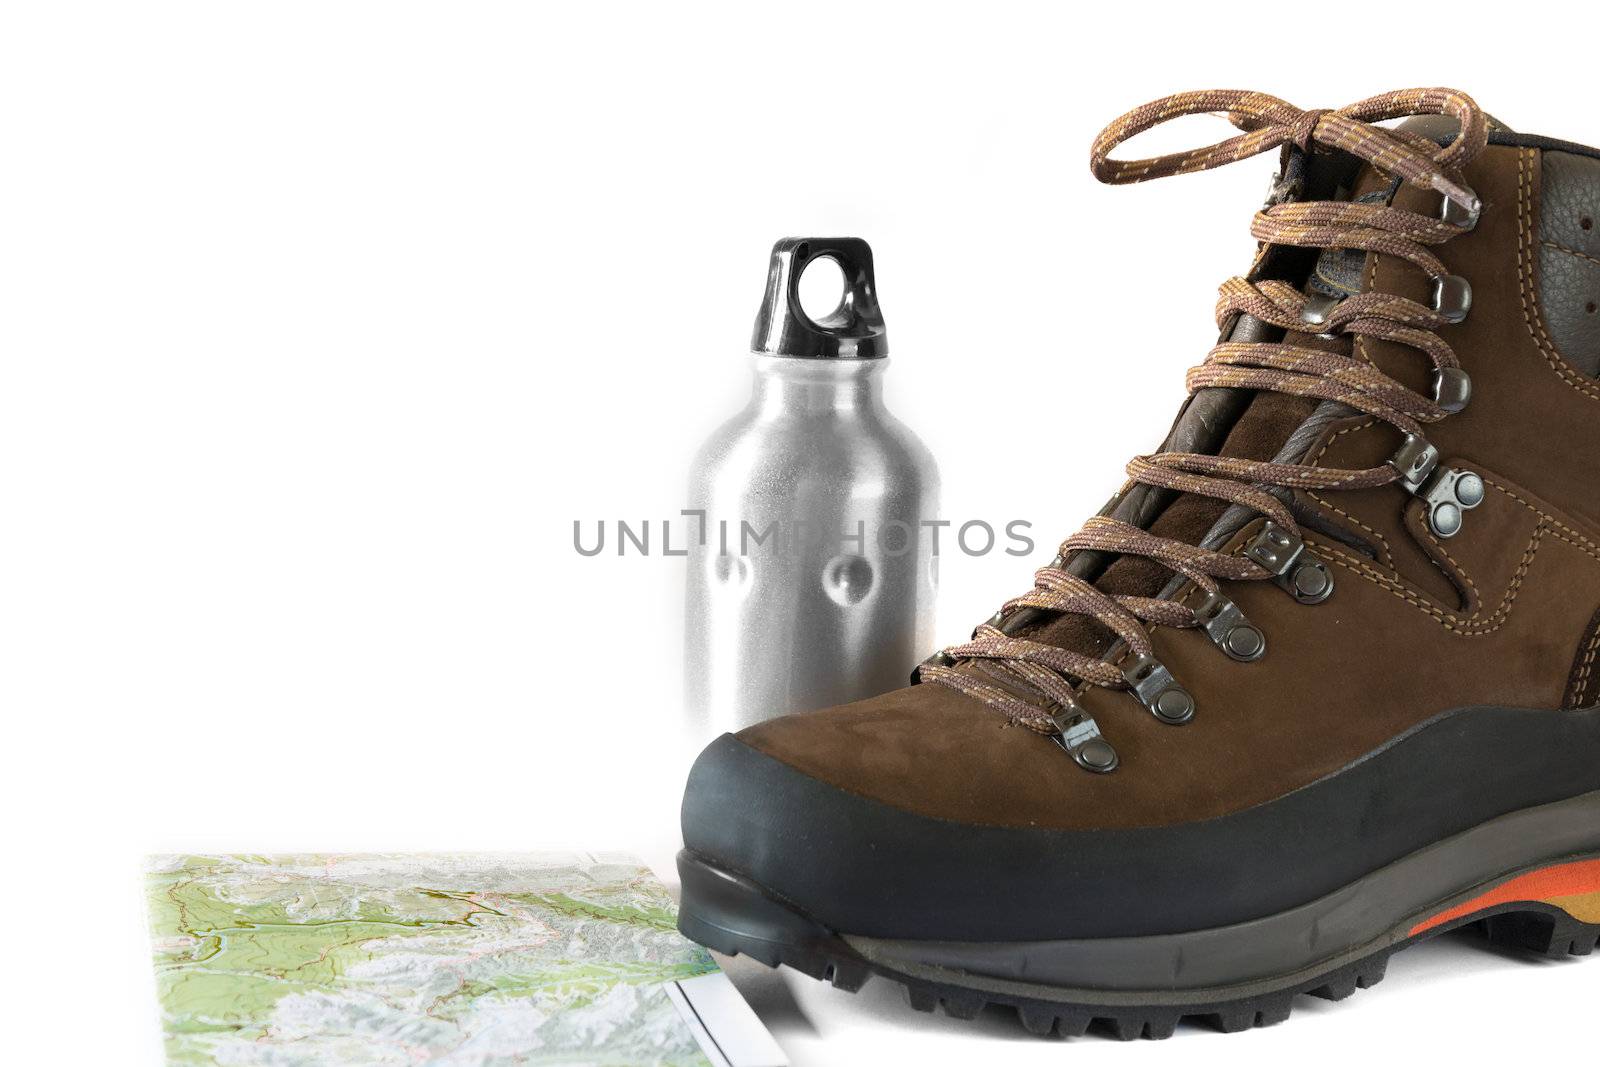 hiking boot with a water bottle and a topographic map